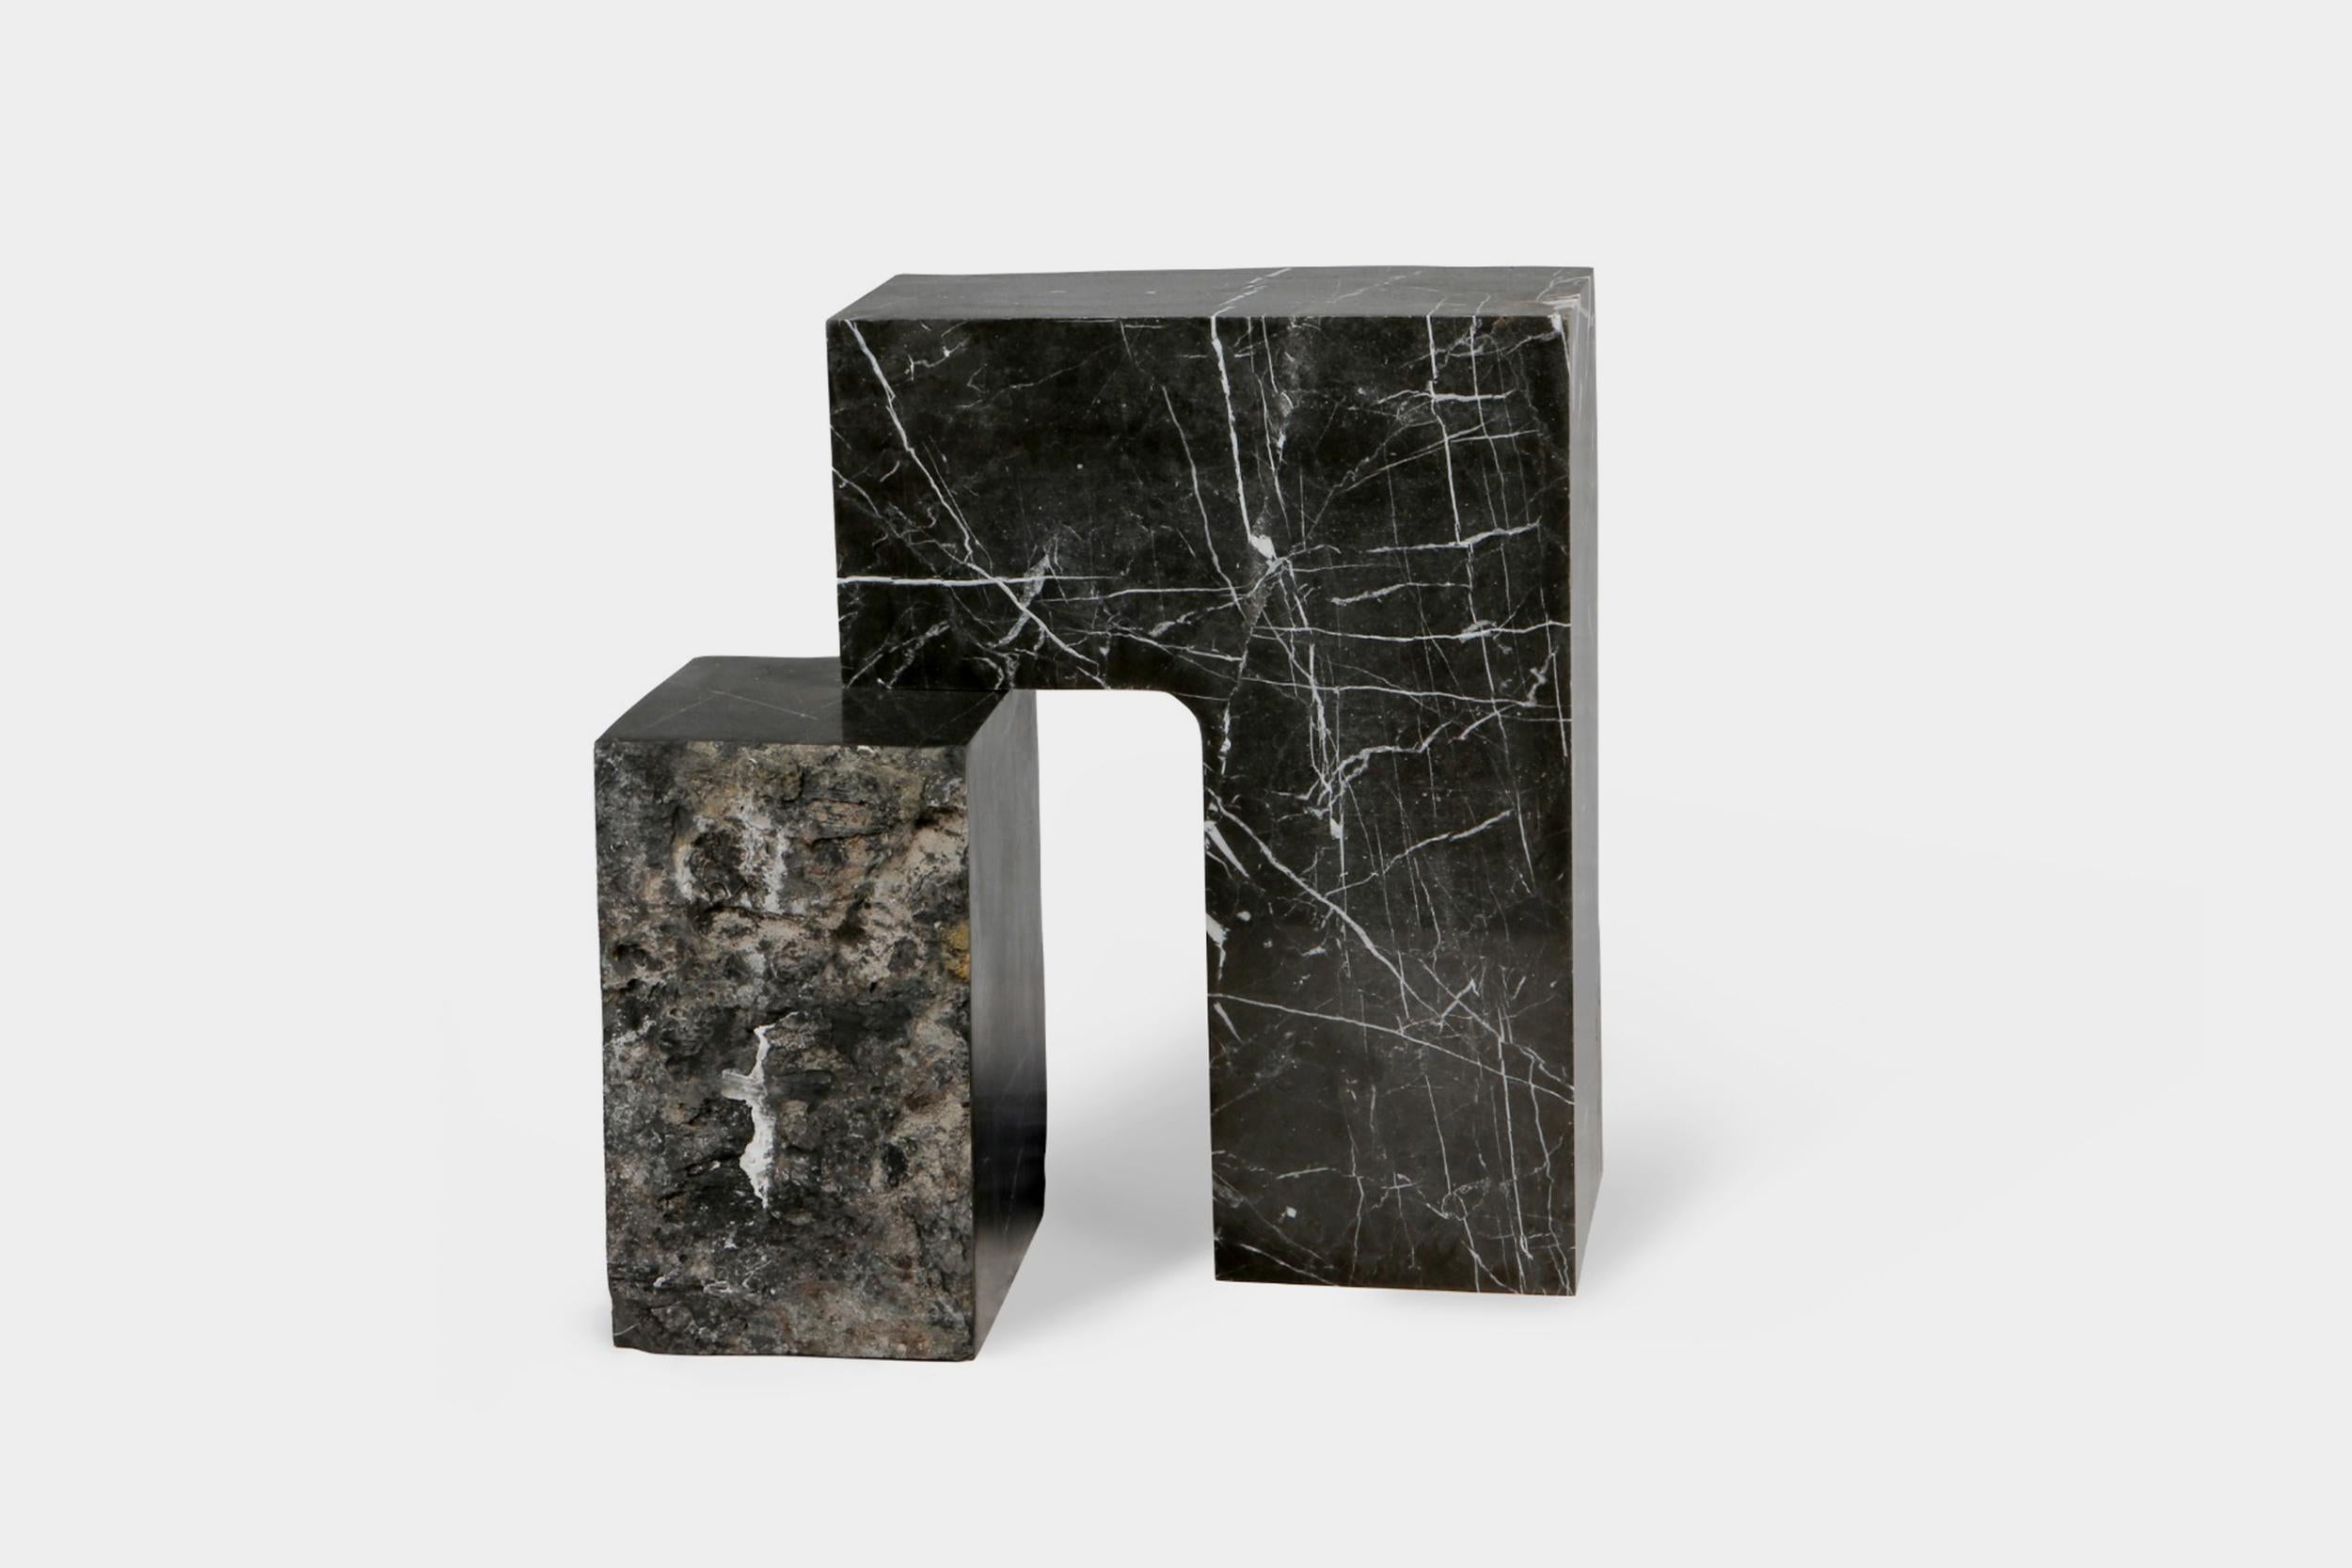 Found II Side Table No.1 by A Space
Dimensions: D48 x W25 x H53cm
Materials: Marble

Spontaneity, environmental awareness and the primeval nature of the materials are central themes explored in this collection, which focuses on the power of the